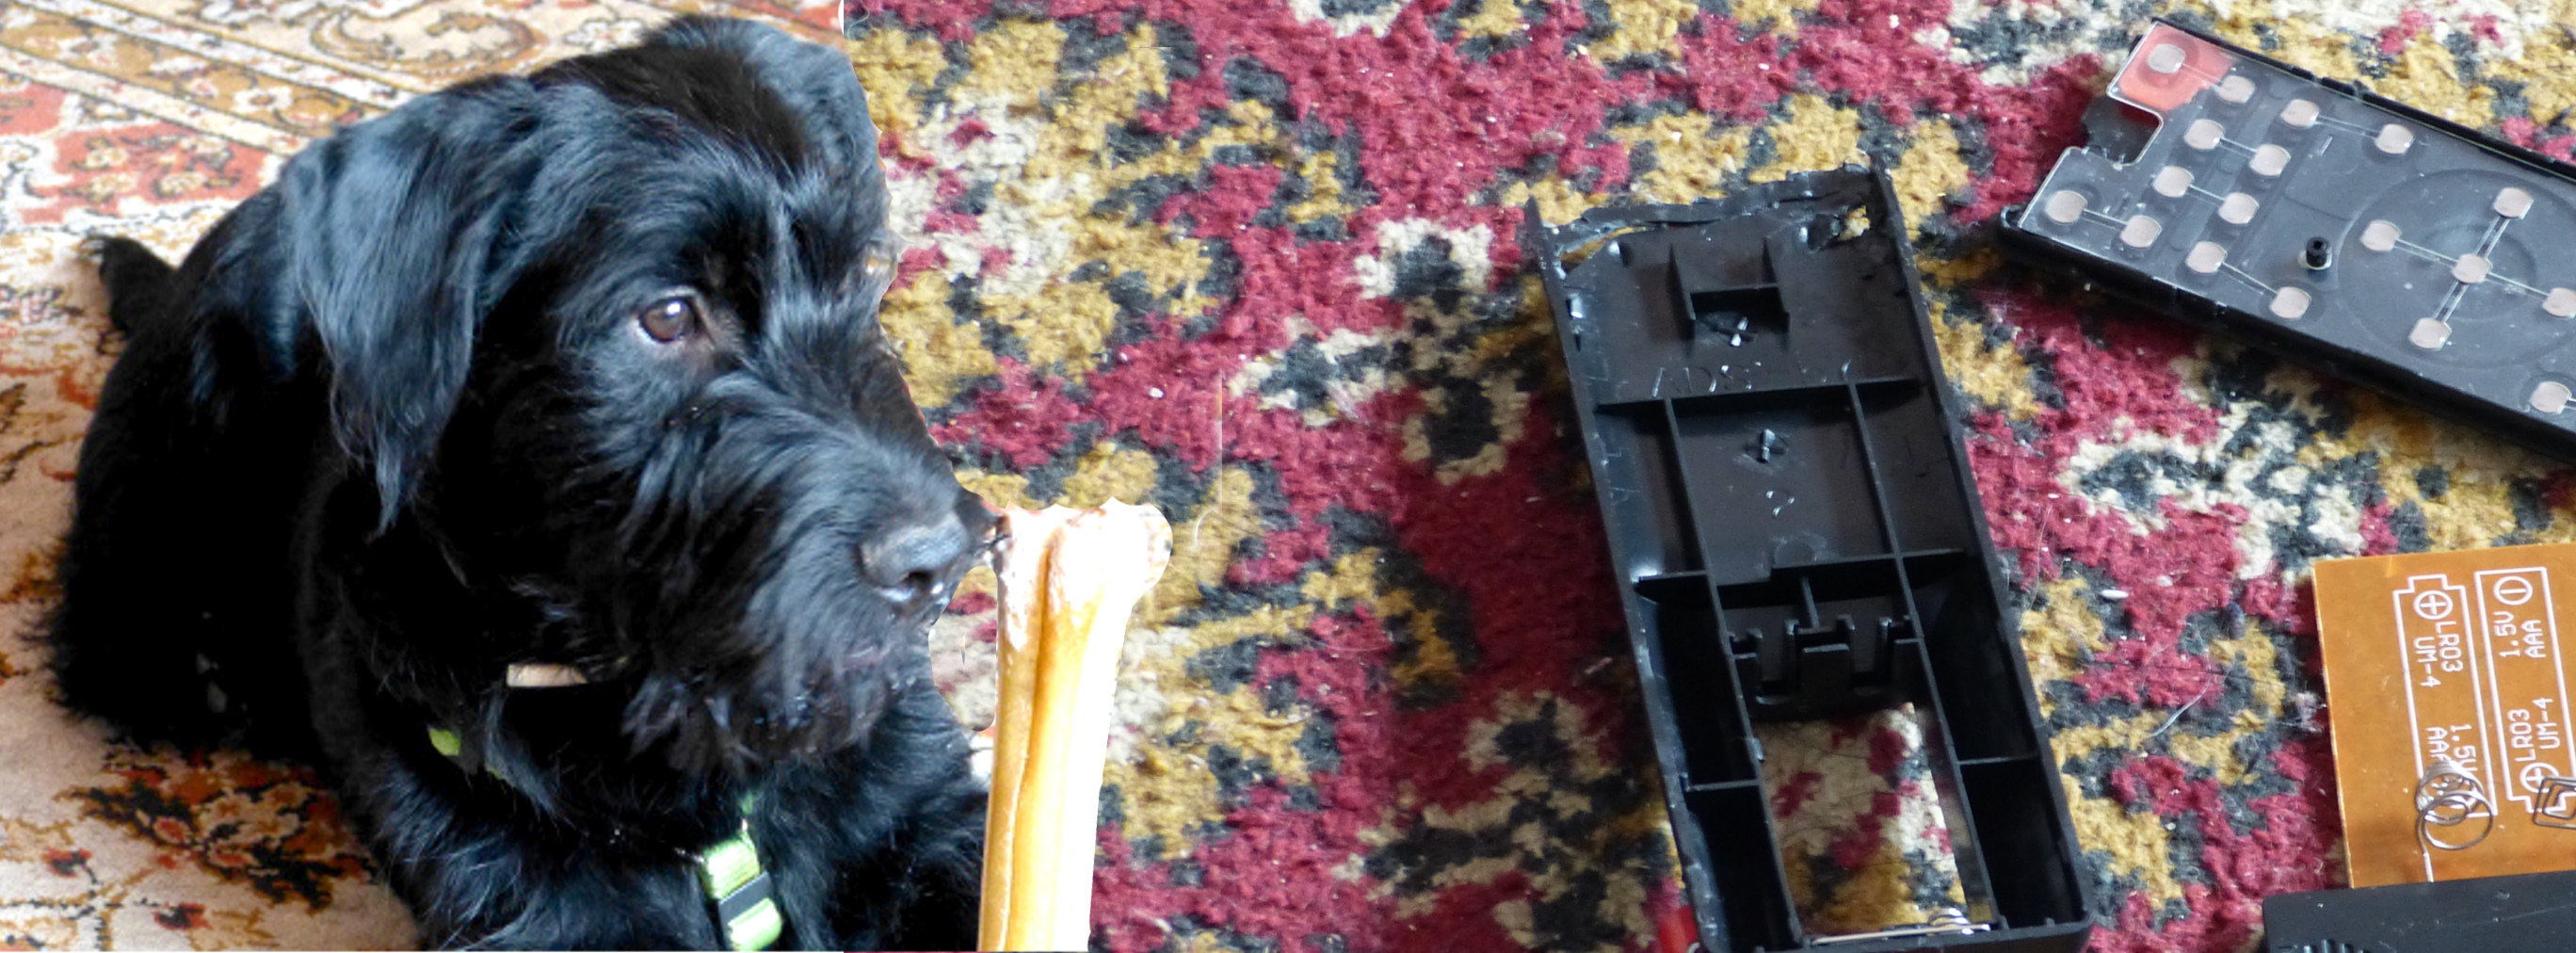 Bosun pasted onto photo of part chewed remote